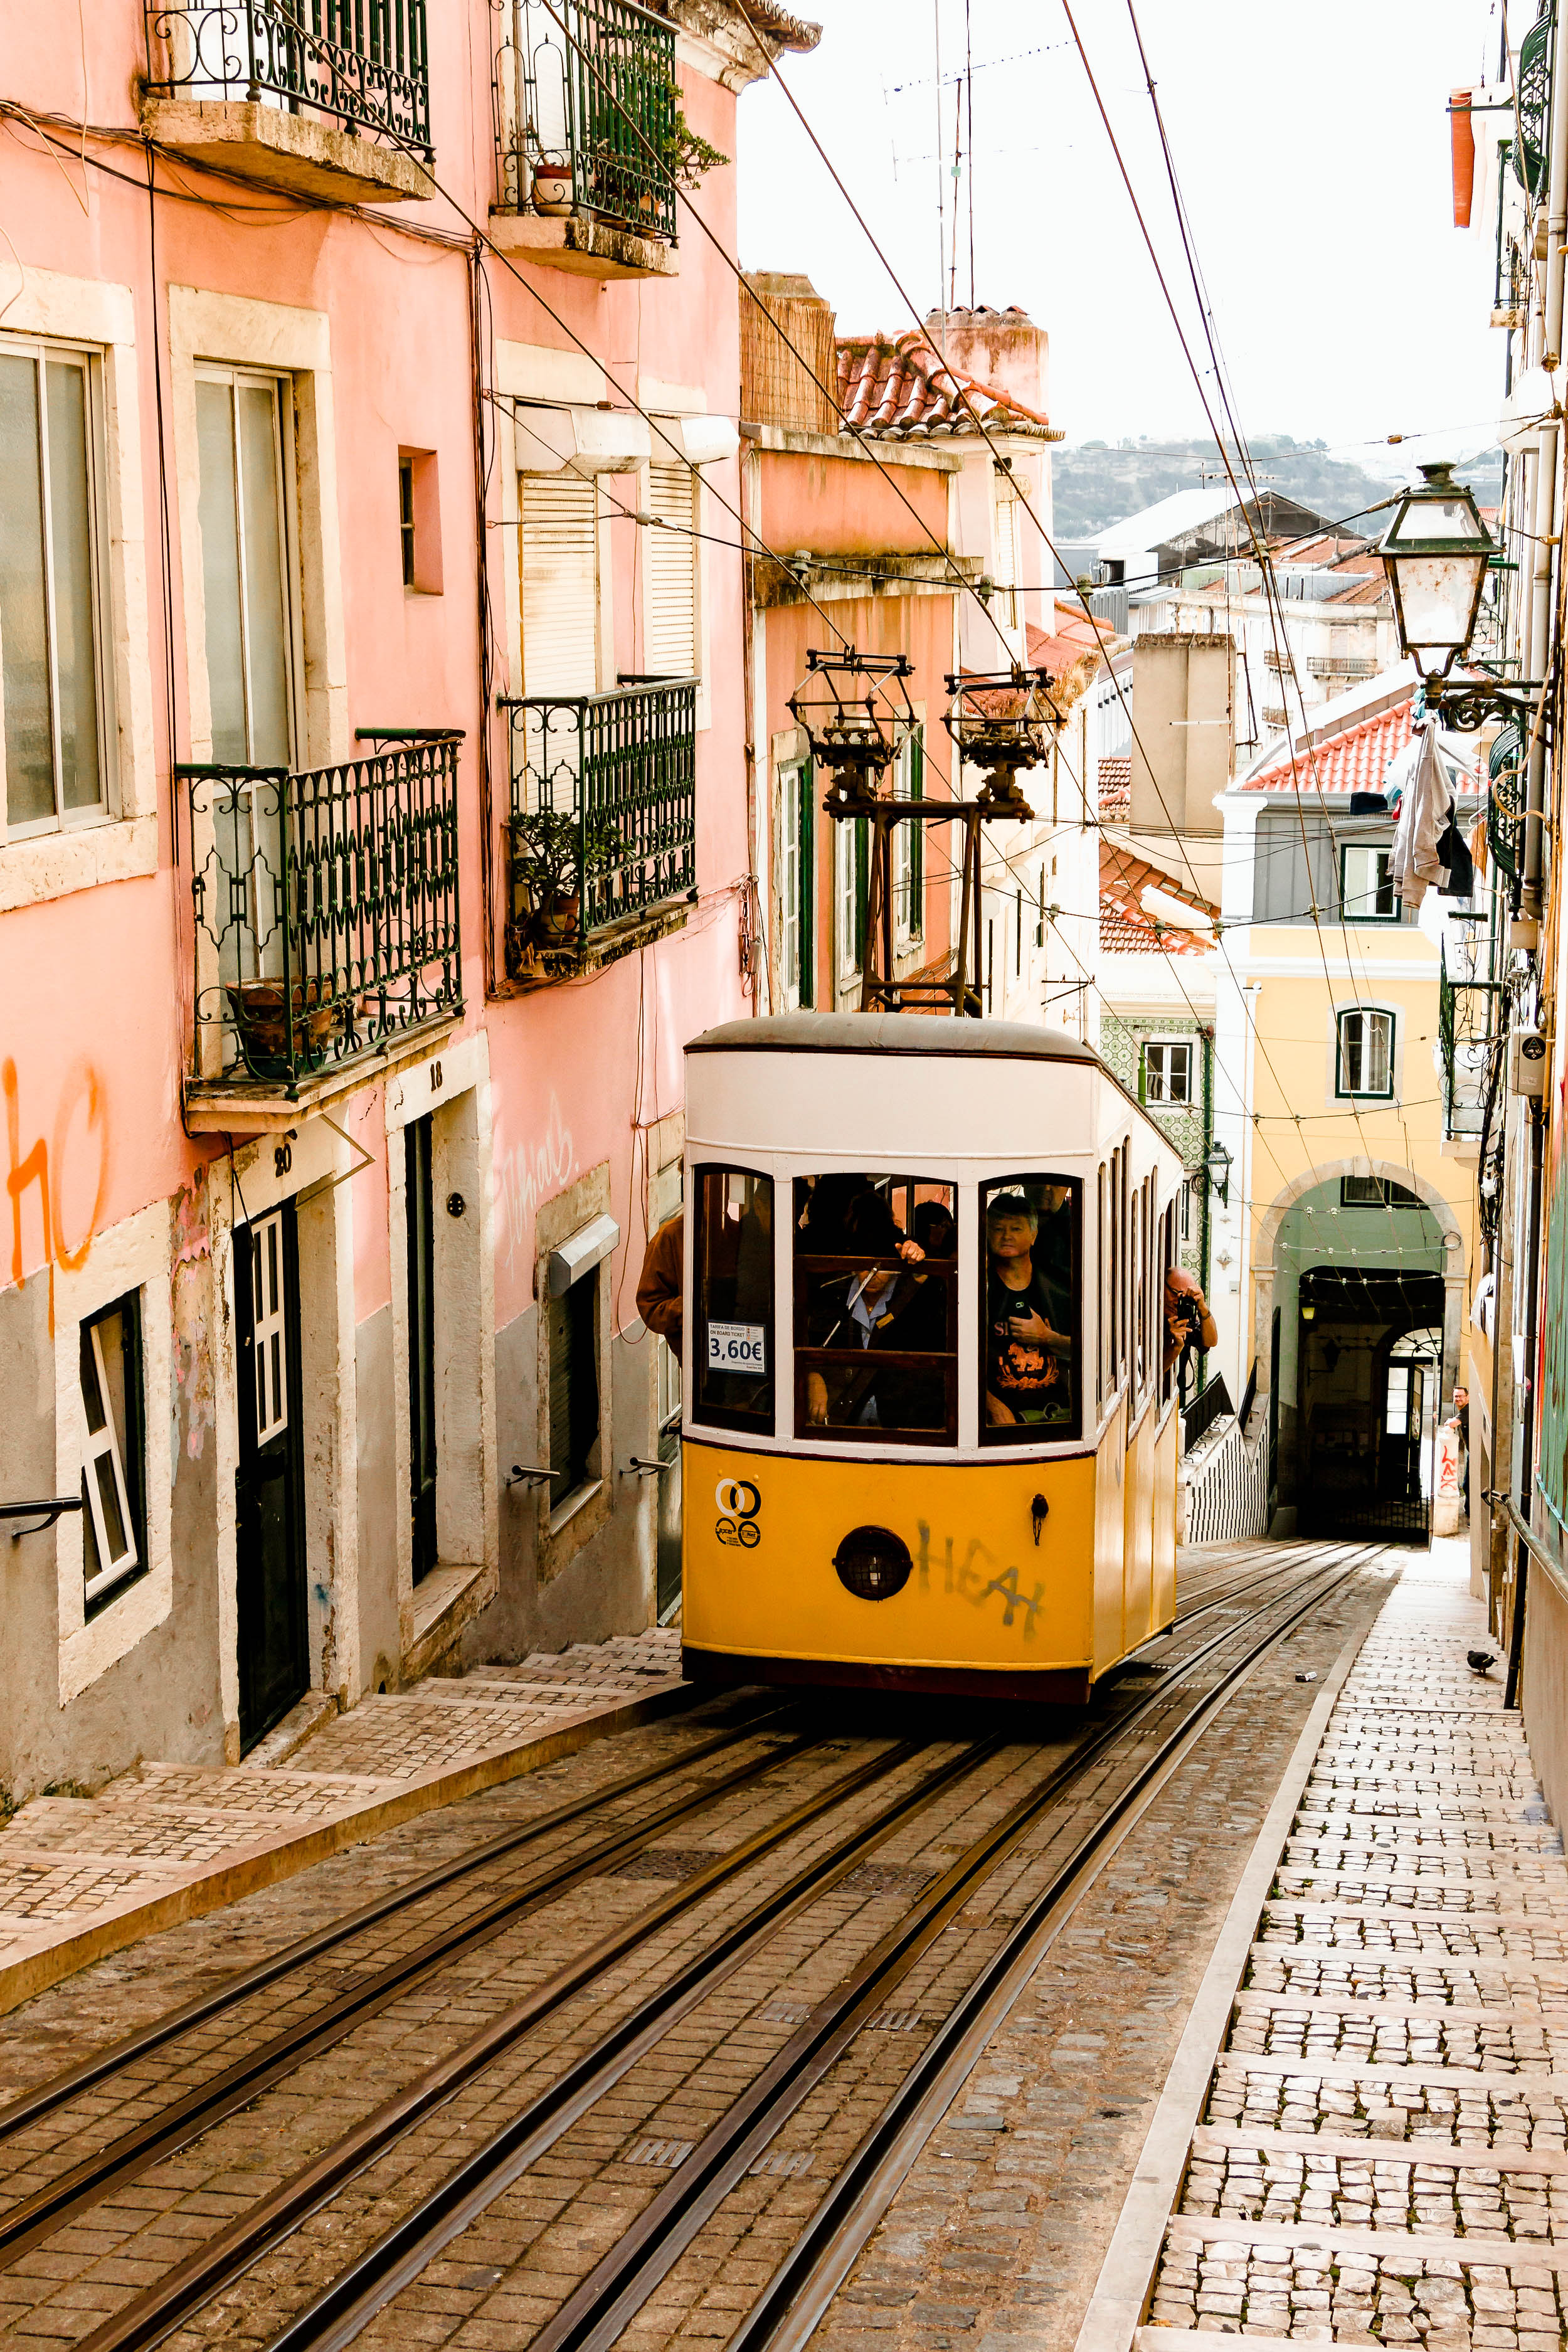 Lisbon is the ultimate European hub for digital nomads (aka girl-bosses who are runnin’ and rockin’ their online biz, all while traveling the world!) Once you step foot in this beachside paradise, you’ll see why. This is our guide of fave activities while living as an online girl boss in this seaside city!